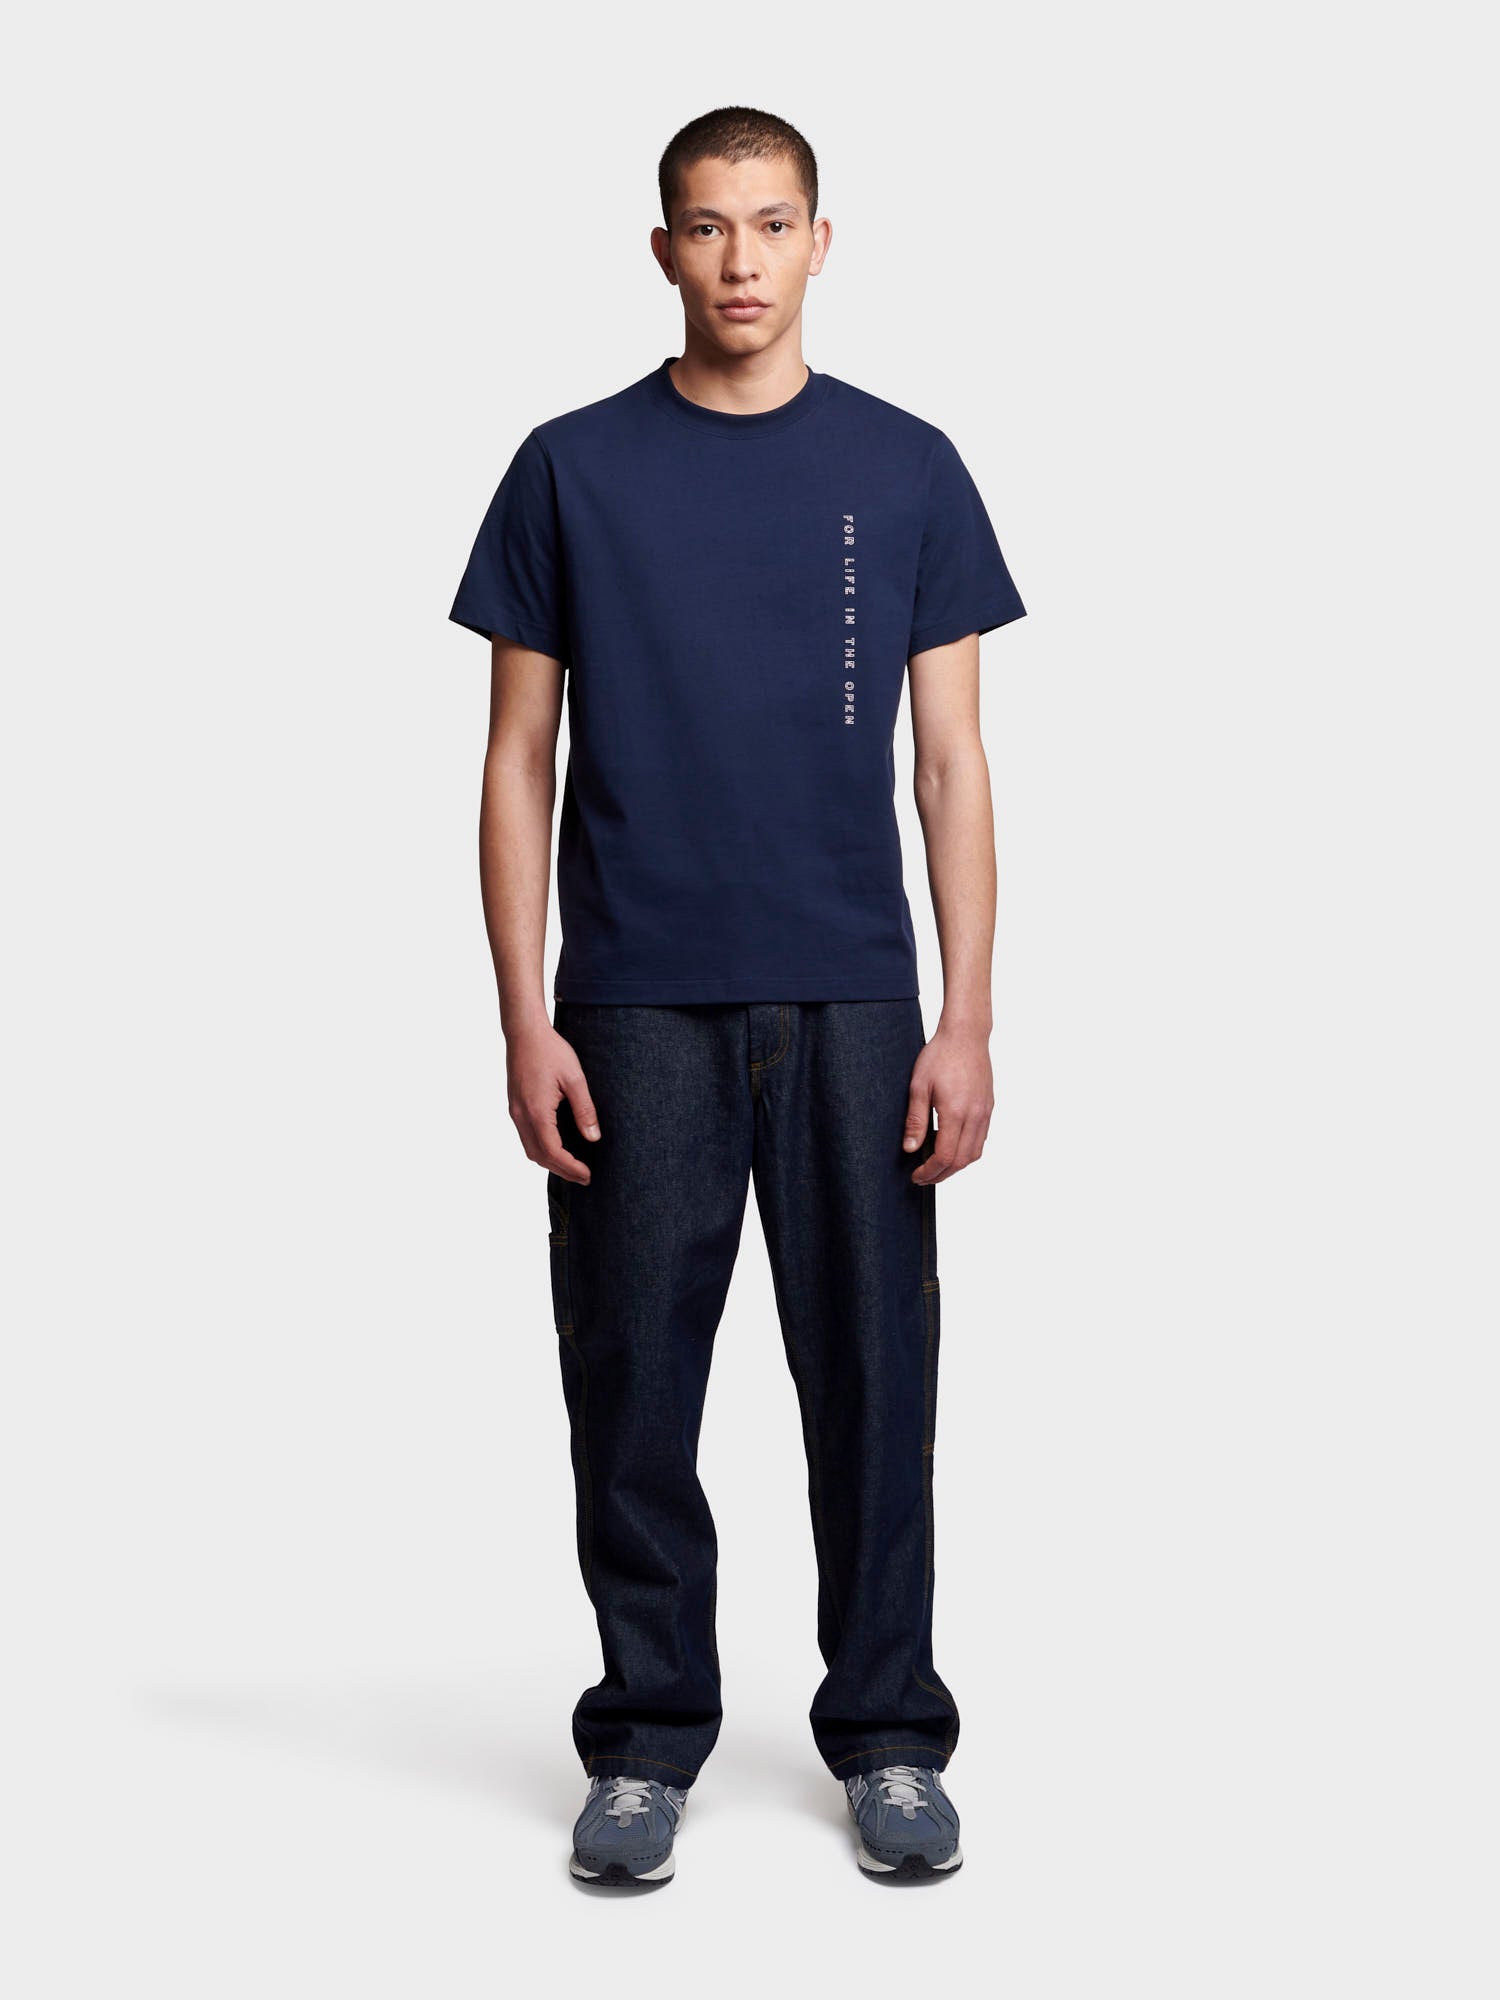 Relaxed Fit For Life In The Open T-Shirt in Navy Blue